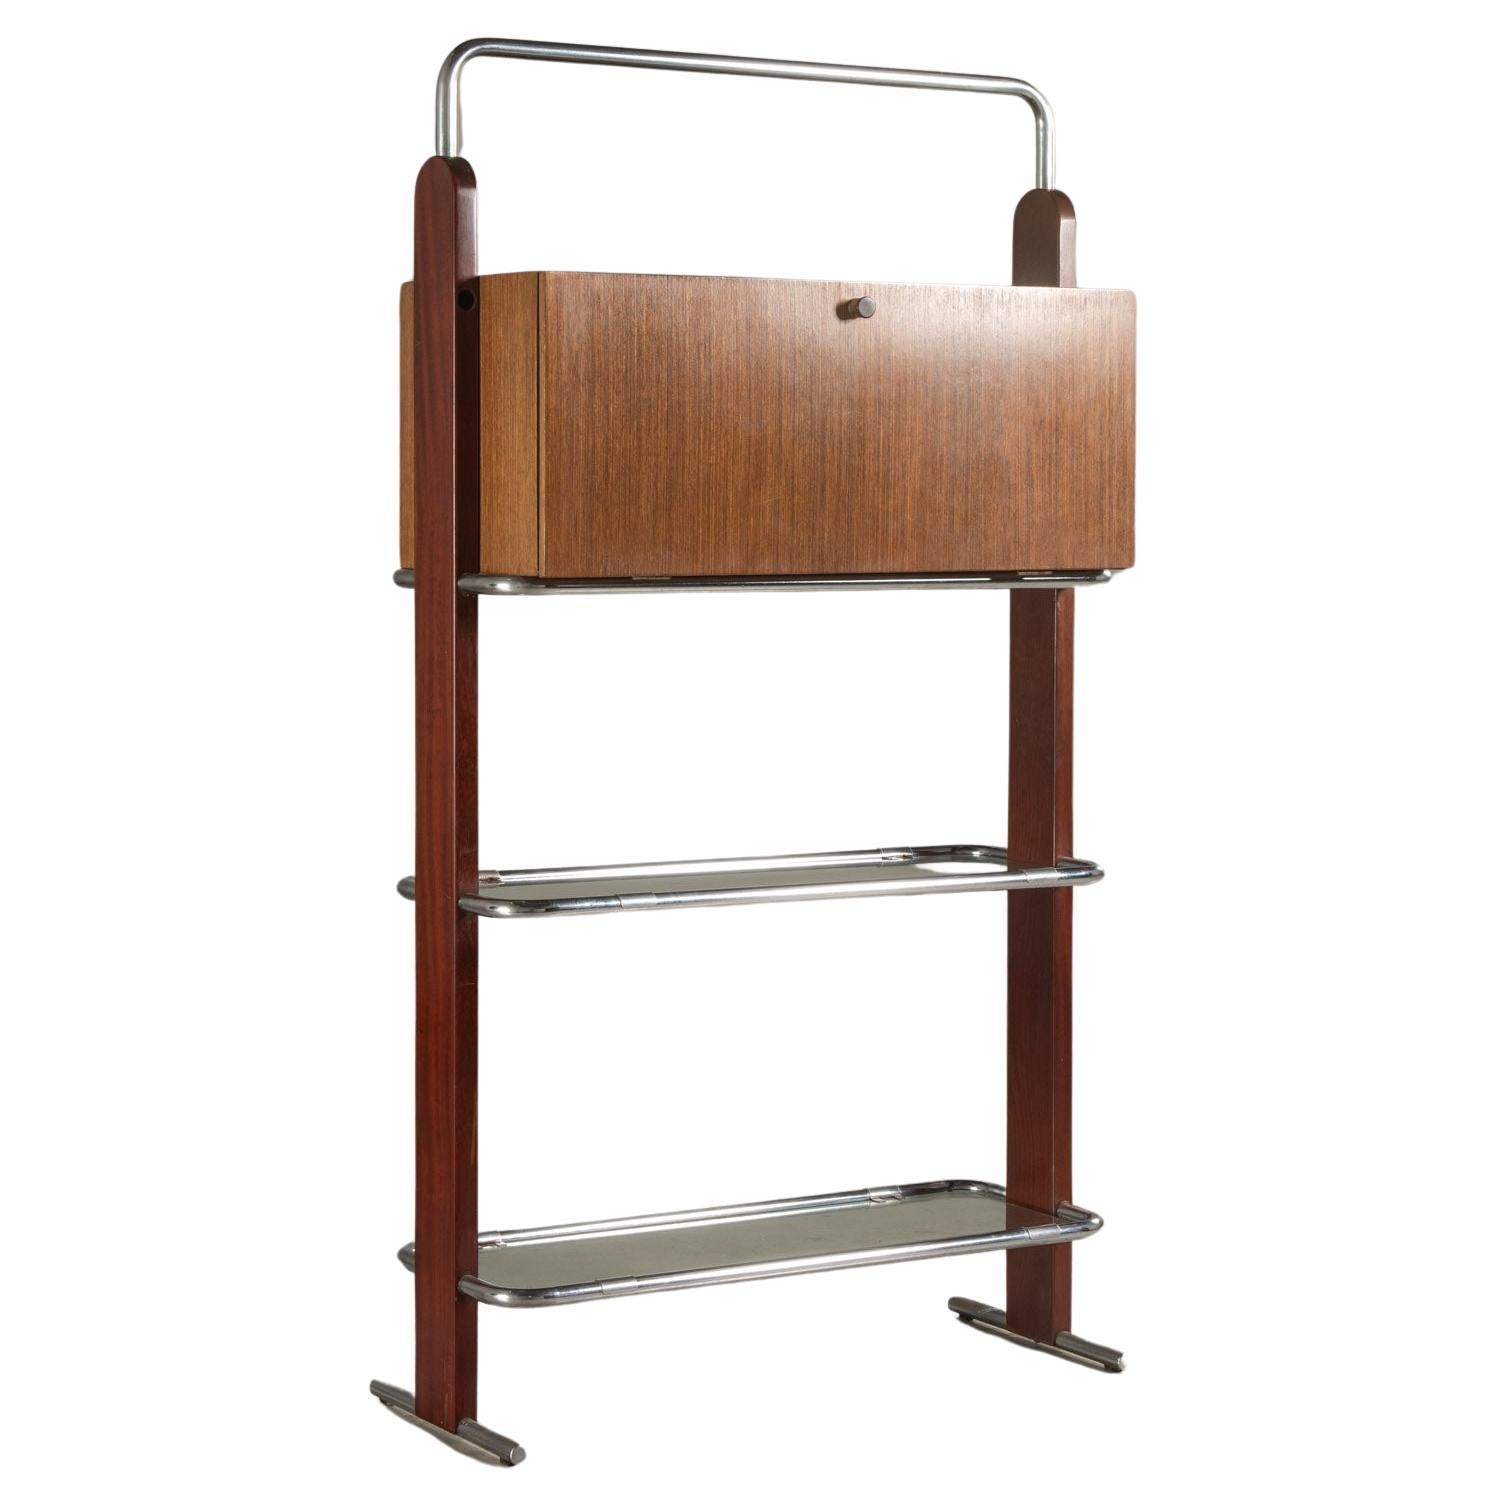 This shelf unit is a distinctive piece of mid-20th century Brazilian design by Percival Lafer. It is a quintessential example of the era's fusion of materials and aesthetics, highlighting the modernist design philosophy that was prevalent at the